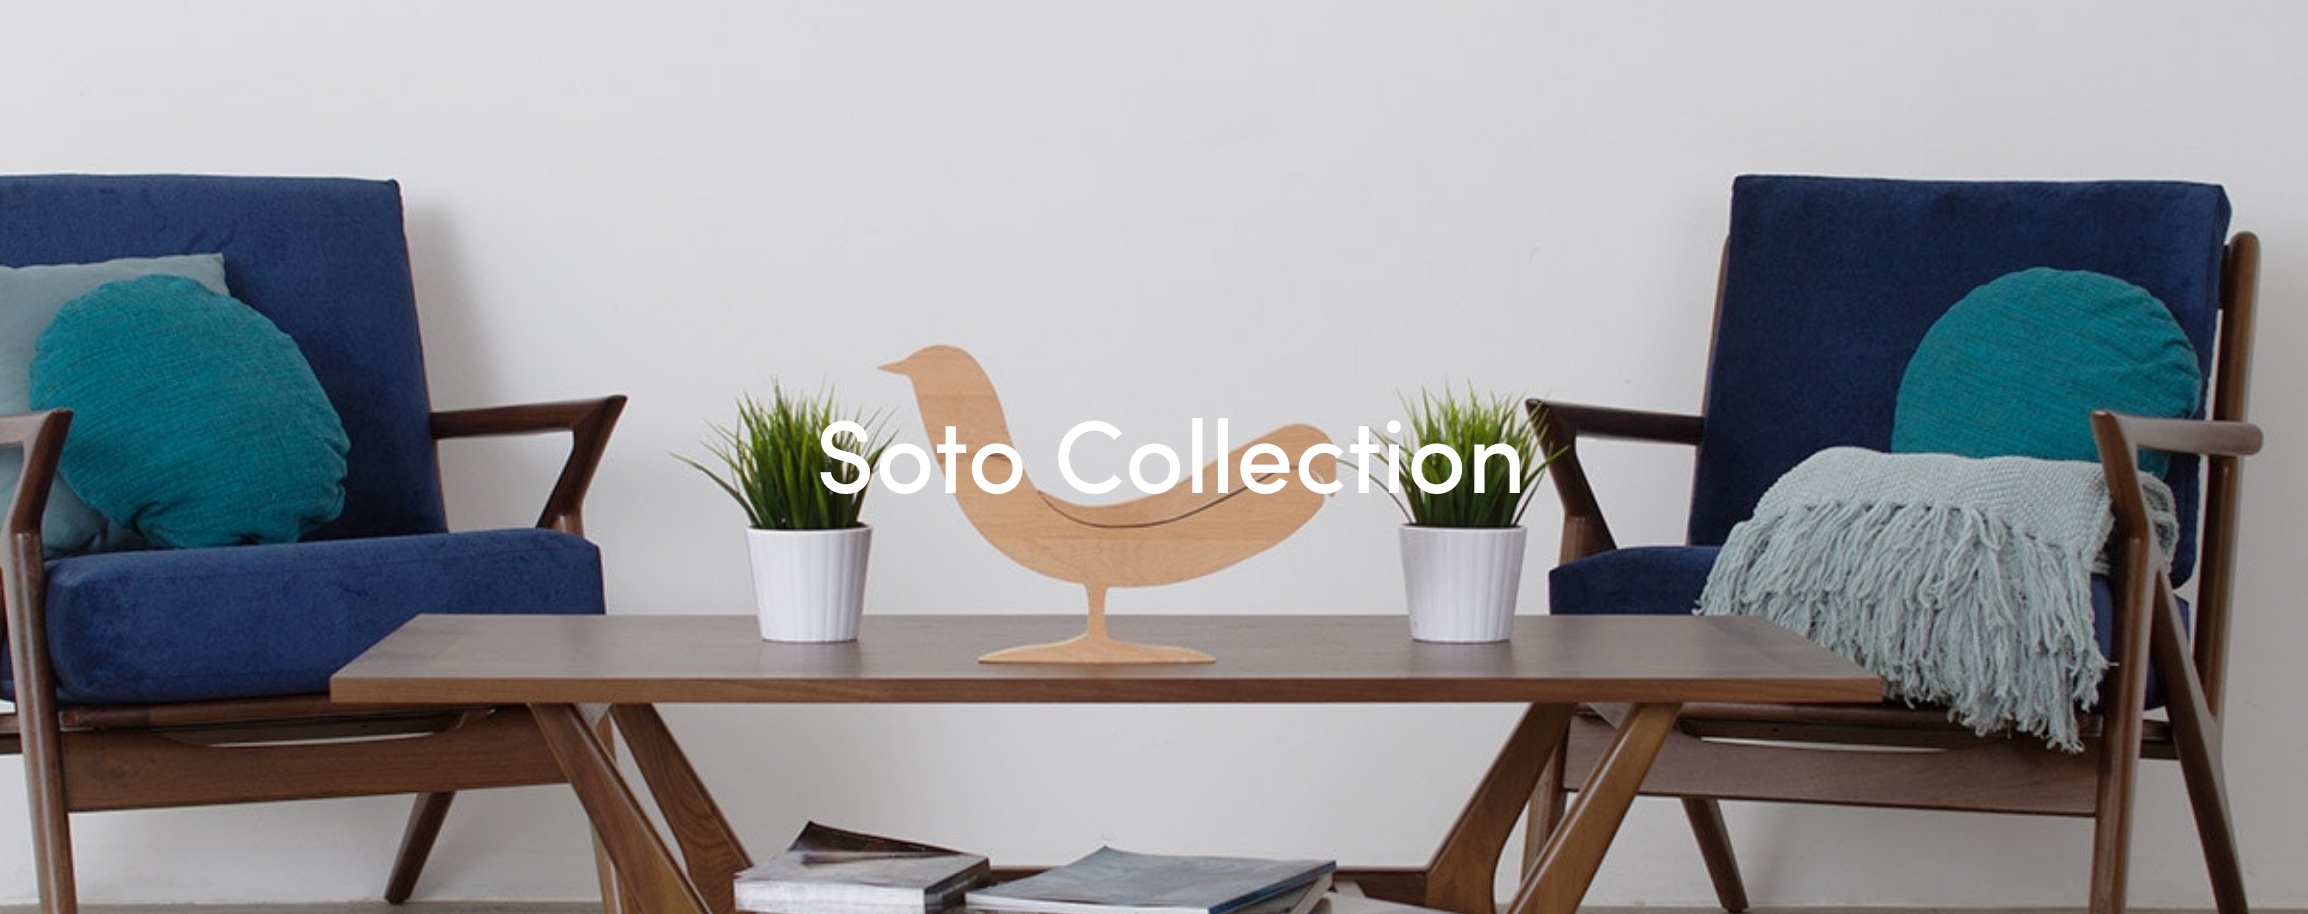 Joybird Furniture Soto Collection Two Chairs and Table